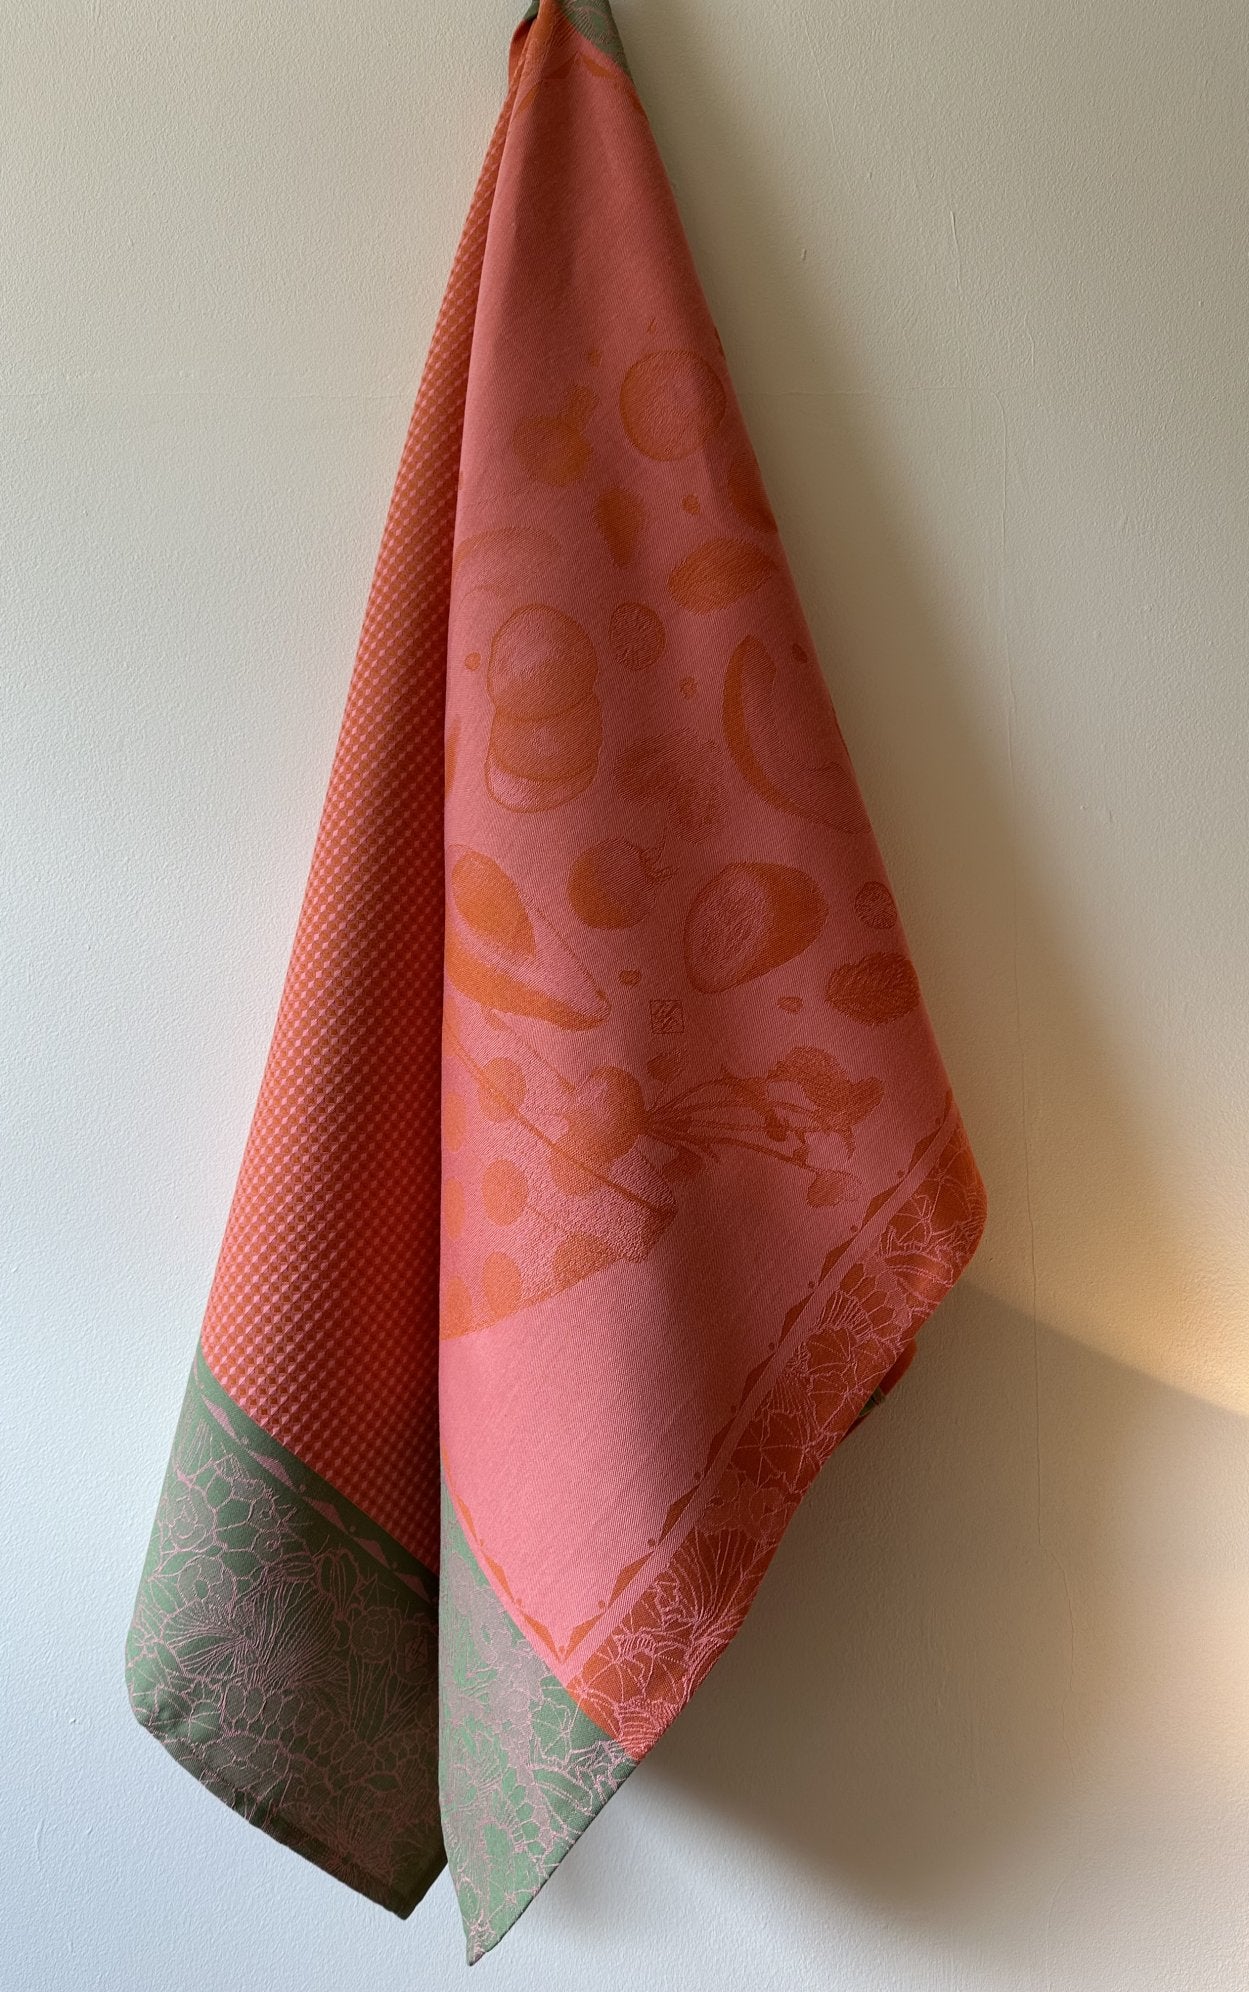 Jacquard Francais "Salade d’Ete" (Red), Woven cotton tea towel. Made in France.